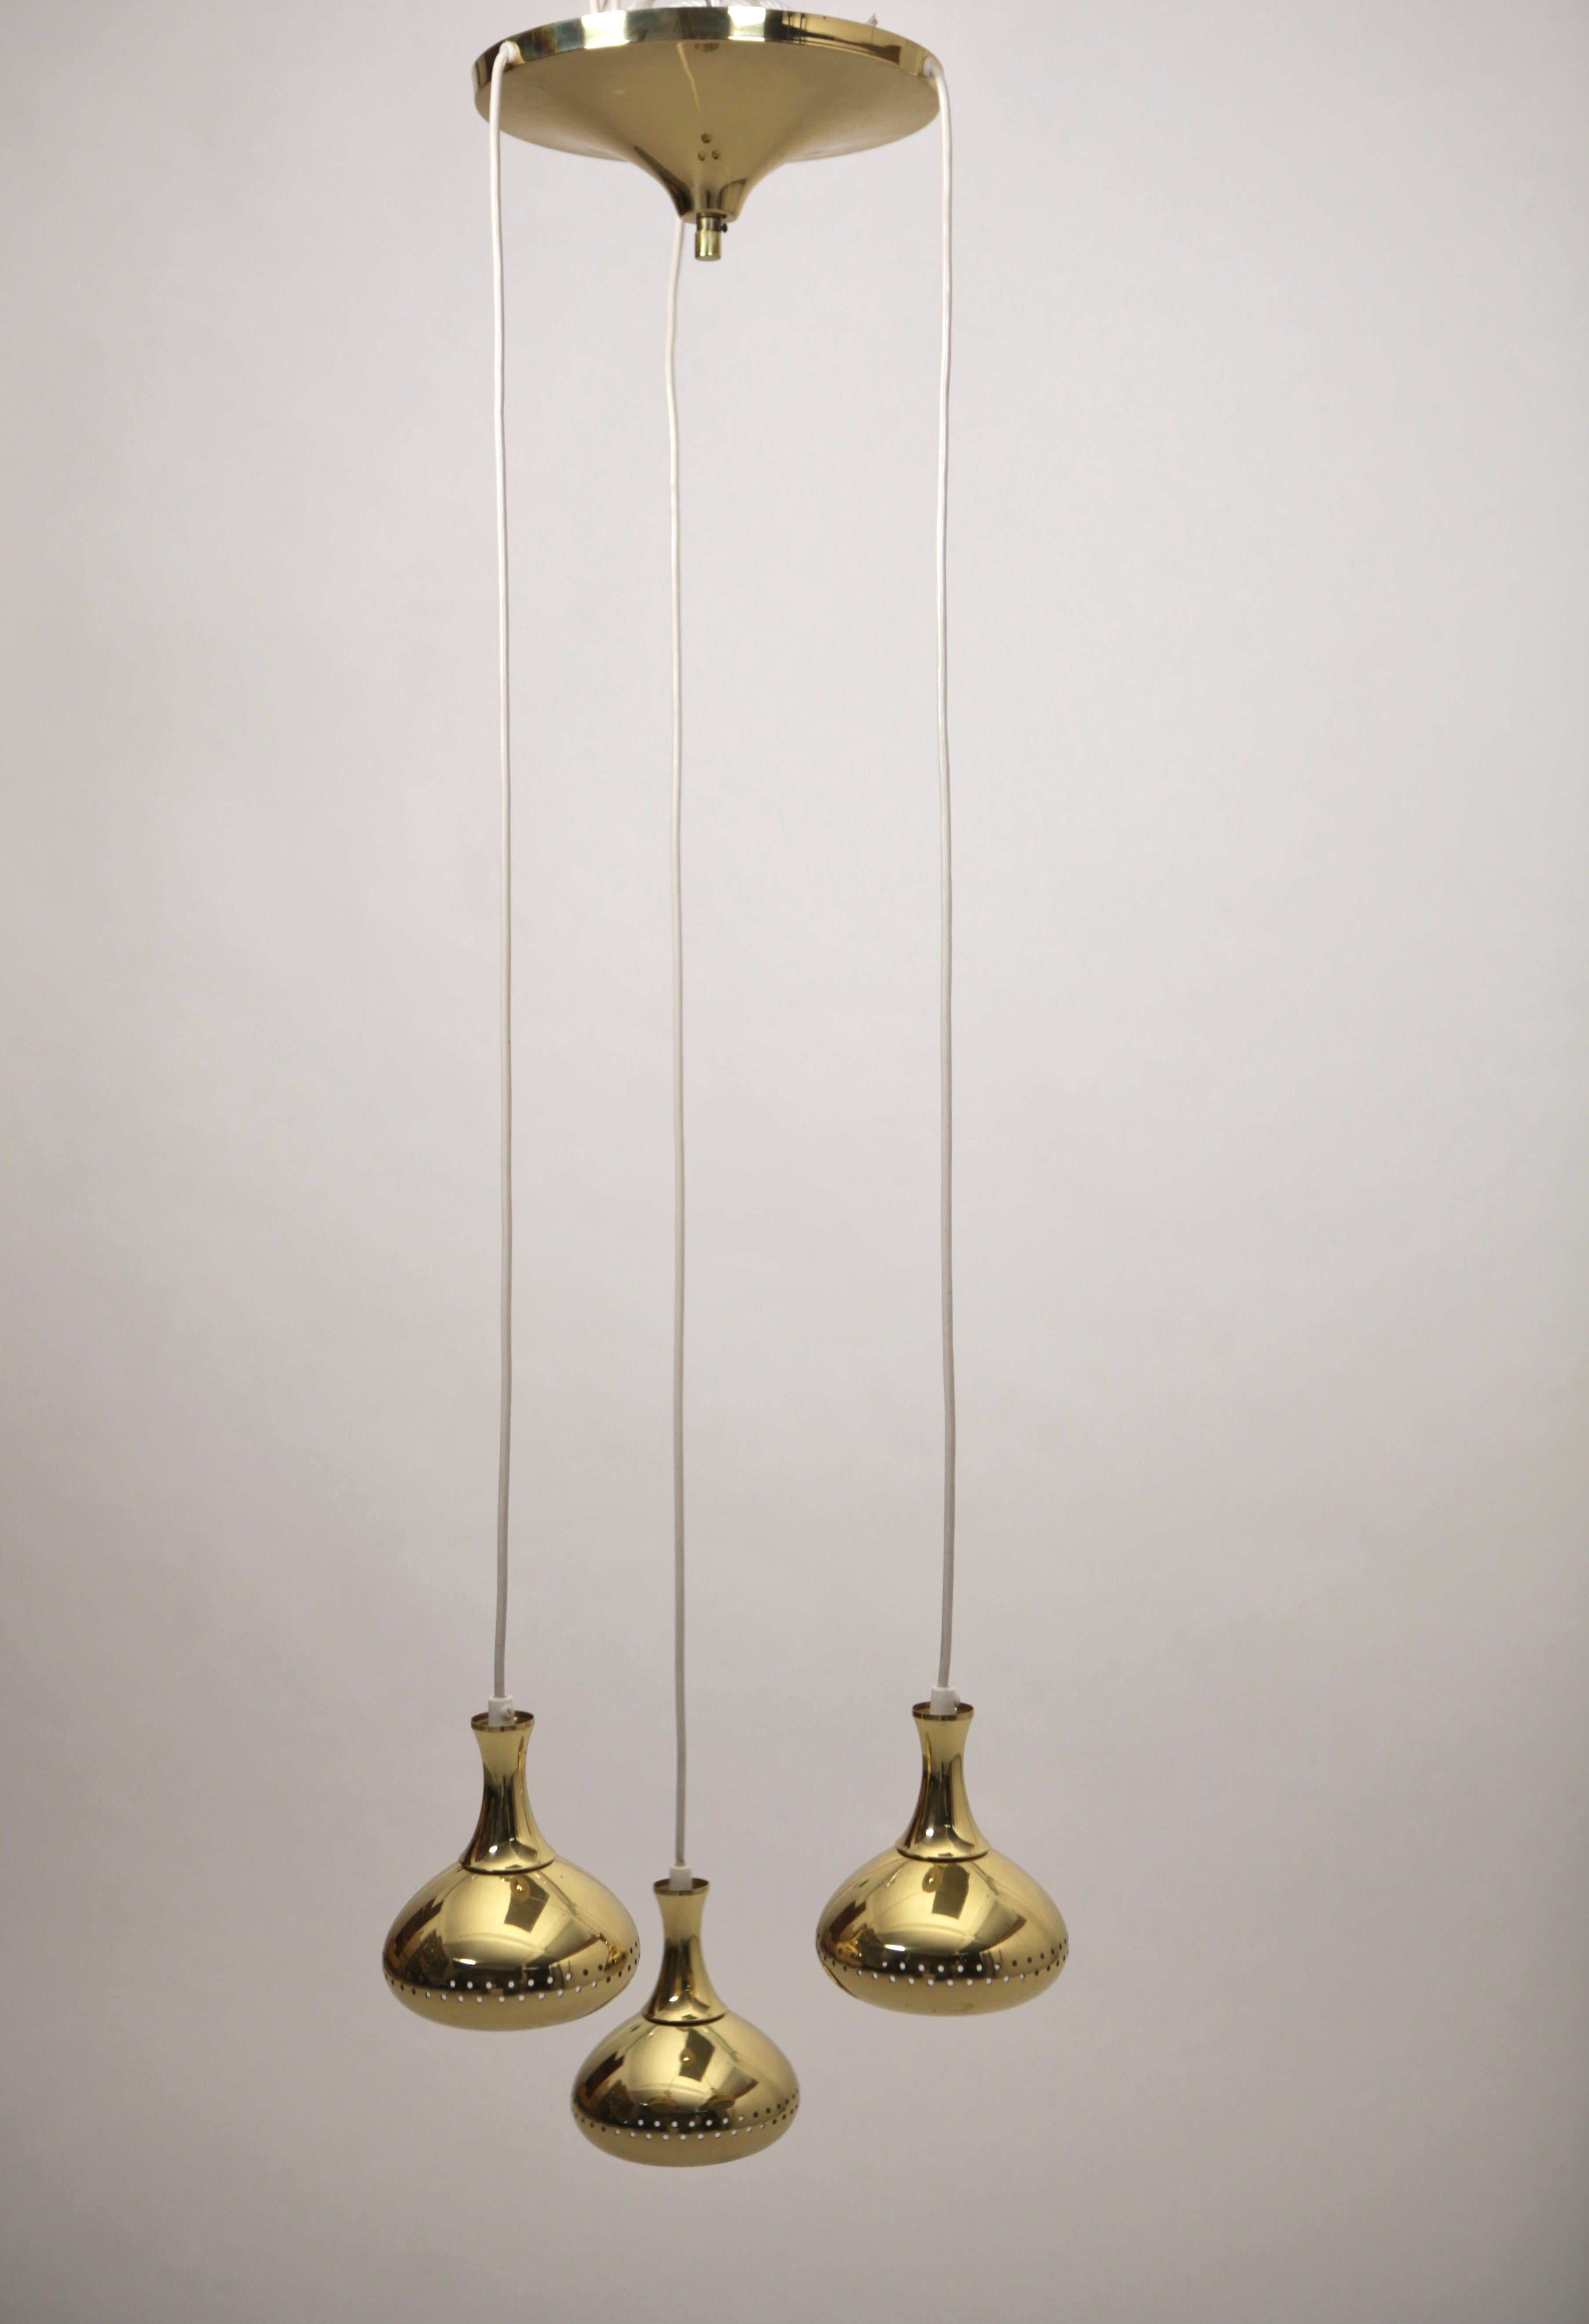 Hans-Agne Jakobsson, 3 light pendant ceiling light in perforated brass, with it´s original large canopy. Very good vintage condition, no dents.
The pendants are 15cm in diameter and 16 cm height. The canopy is 25 cm dia.
The mounted height shown on